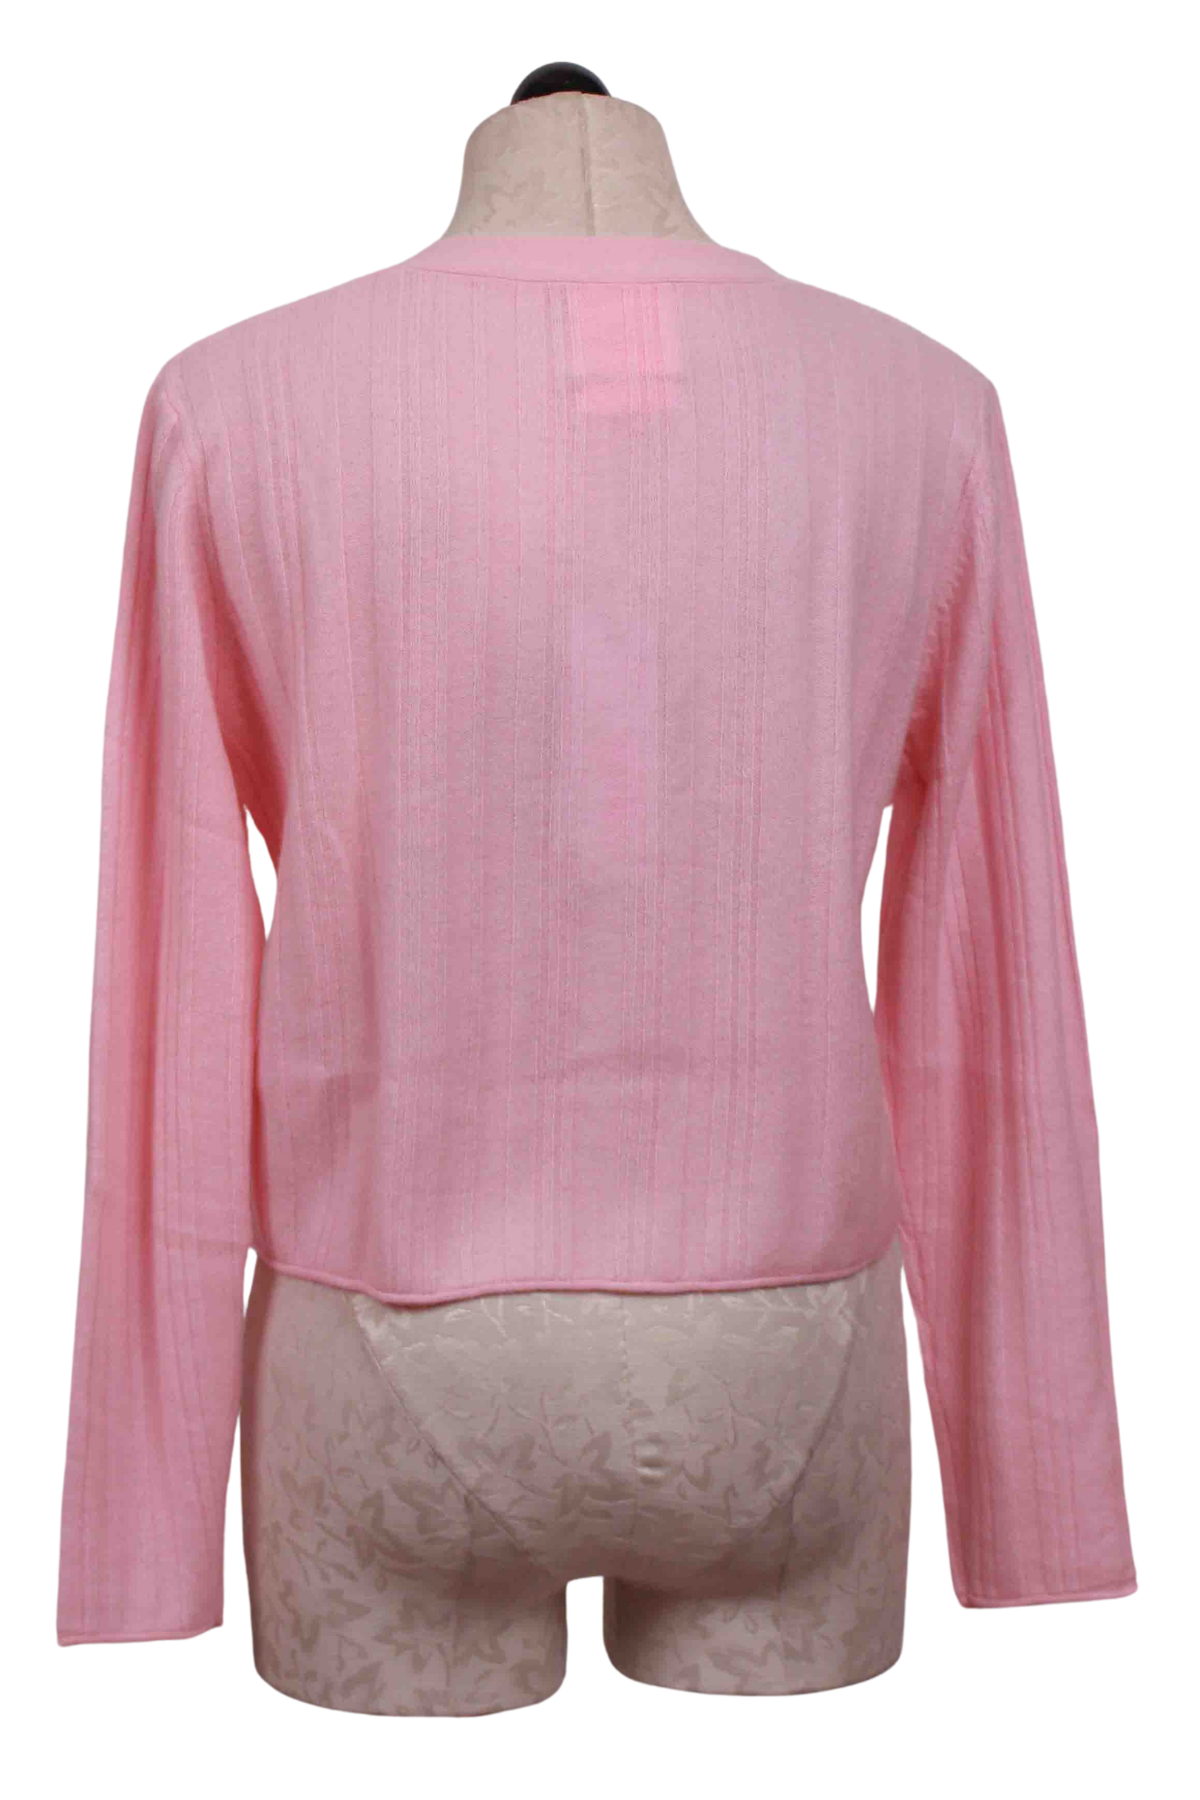 back view of Candy Floss Cashmere Montana Cardi by Crush.